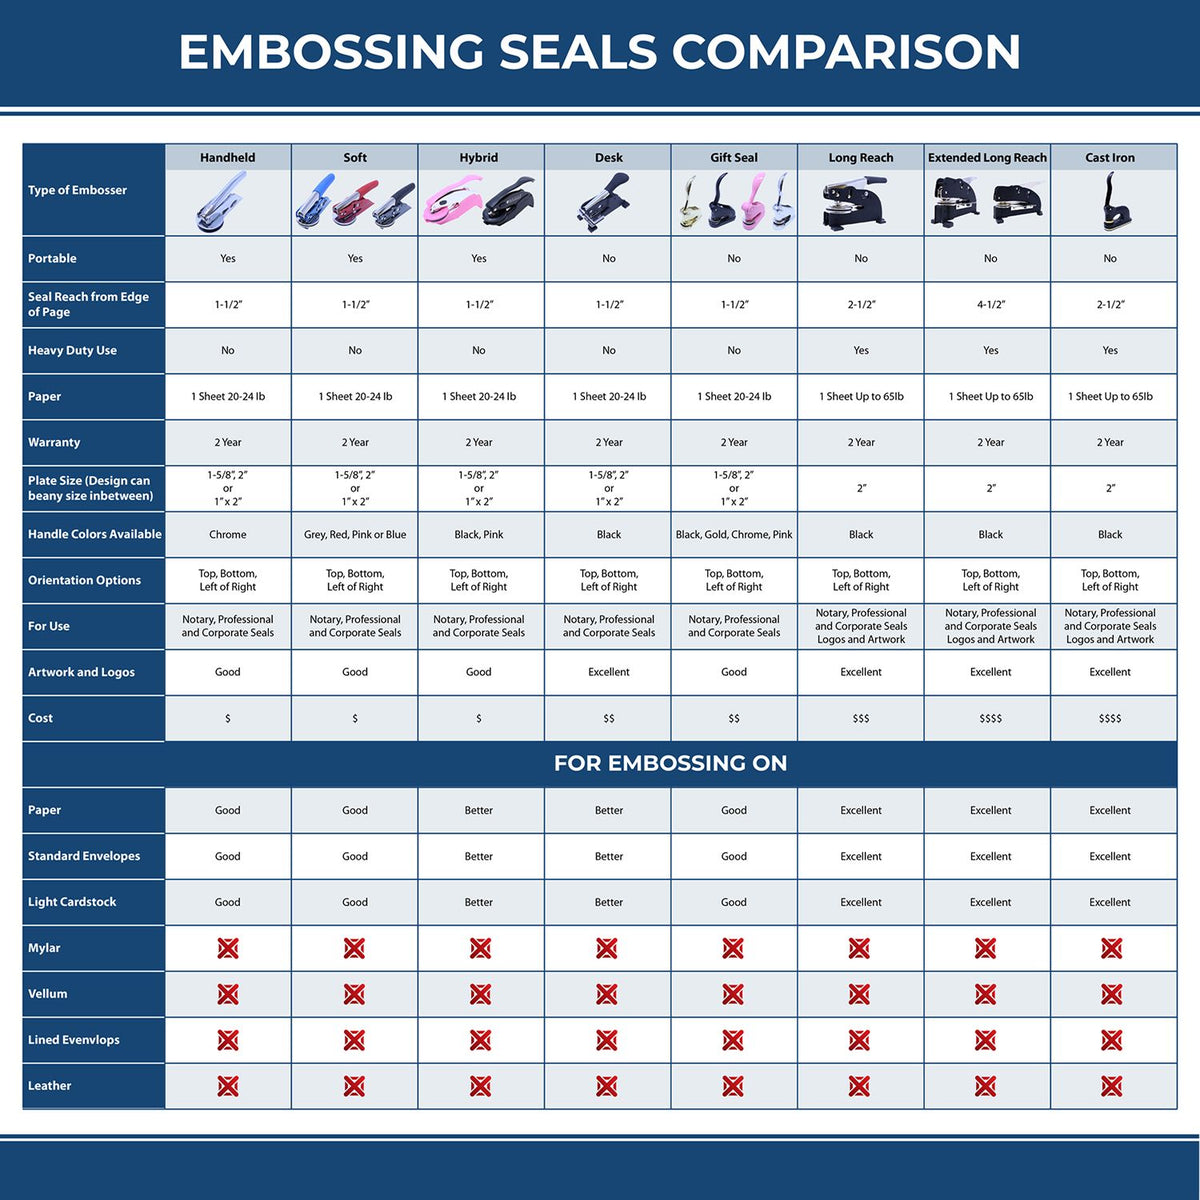 A comparison chart for the different types of mount models available for the Long Reach Arkansas PE Seal.